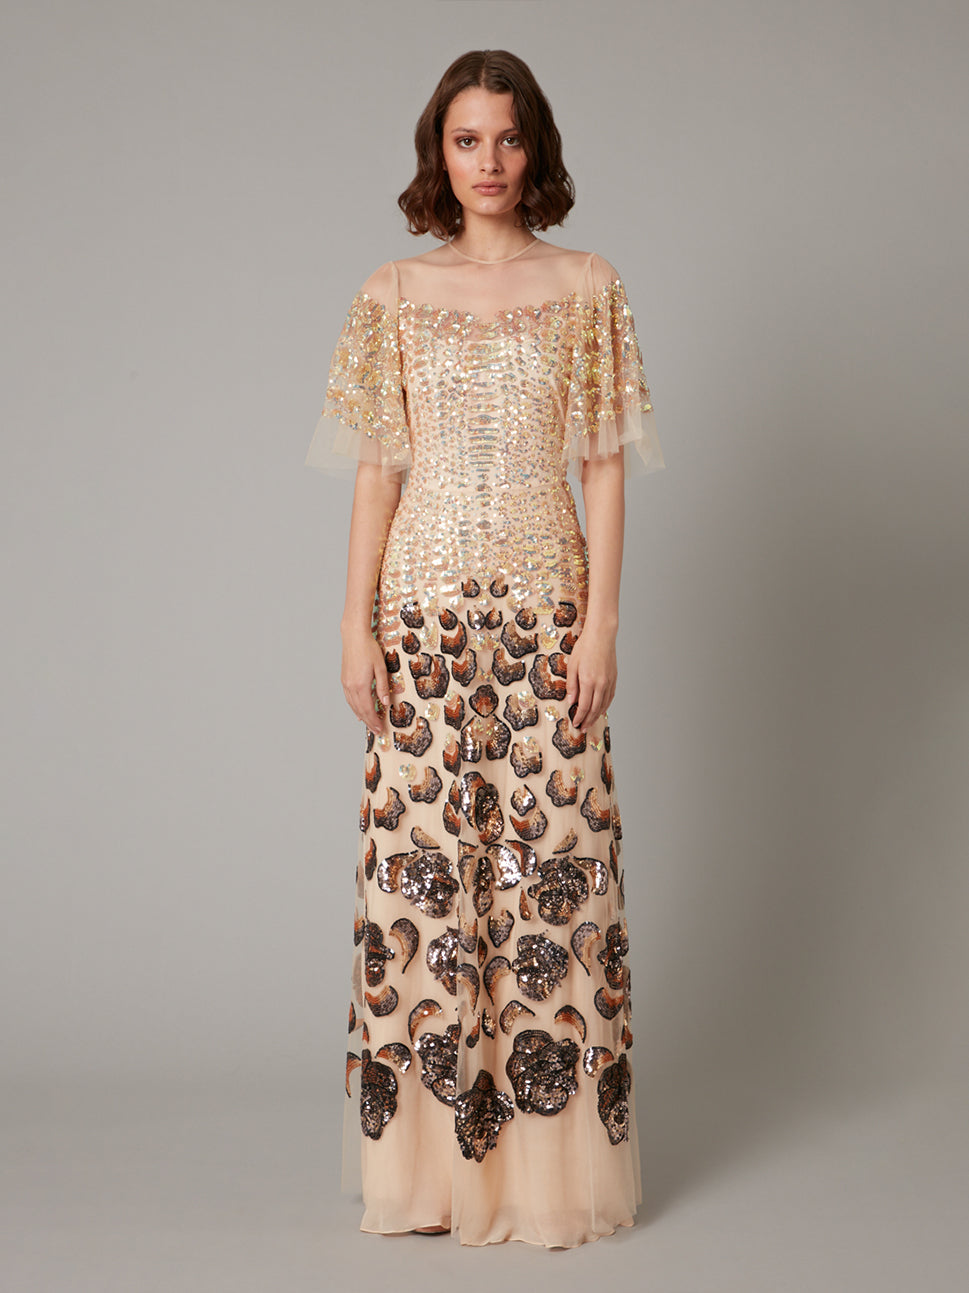 Temperley London Piper Gown Iridescent Gold 22SSPPP53648B